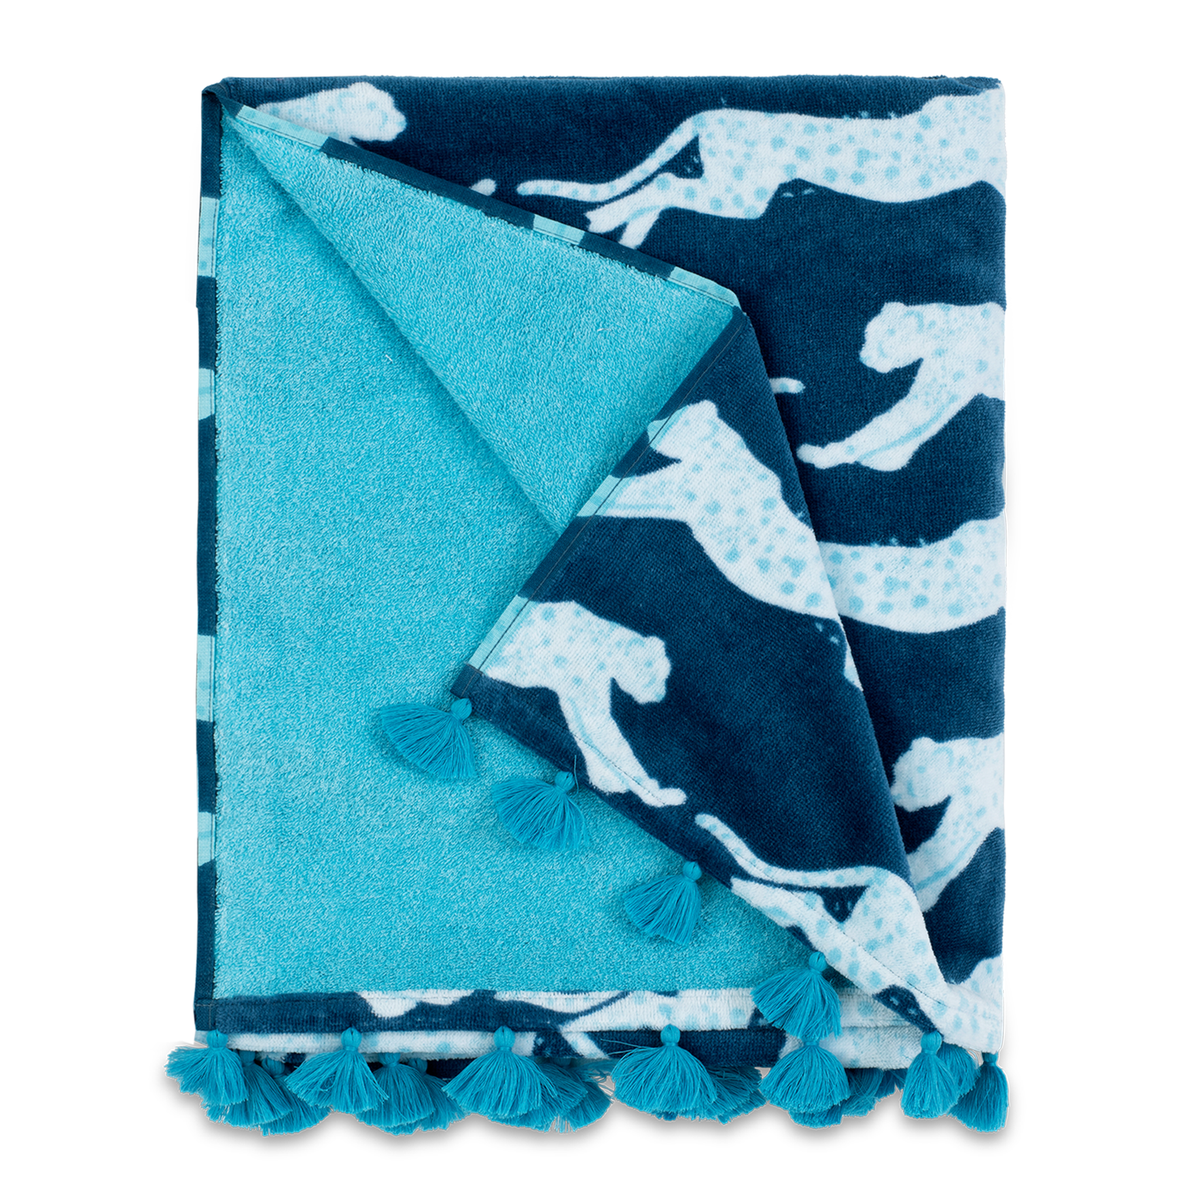 Folded Silo of Matouk Leaping Leopard Beach Towels in Color Navy